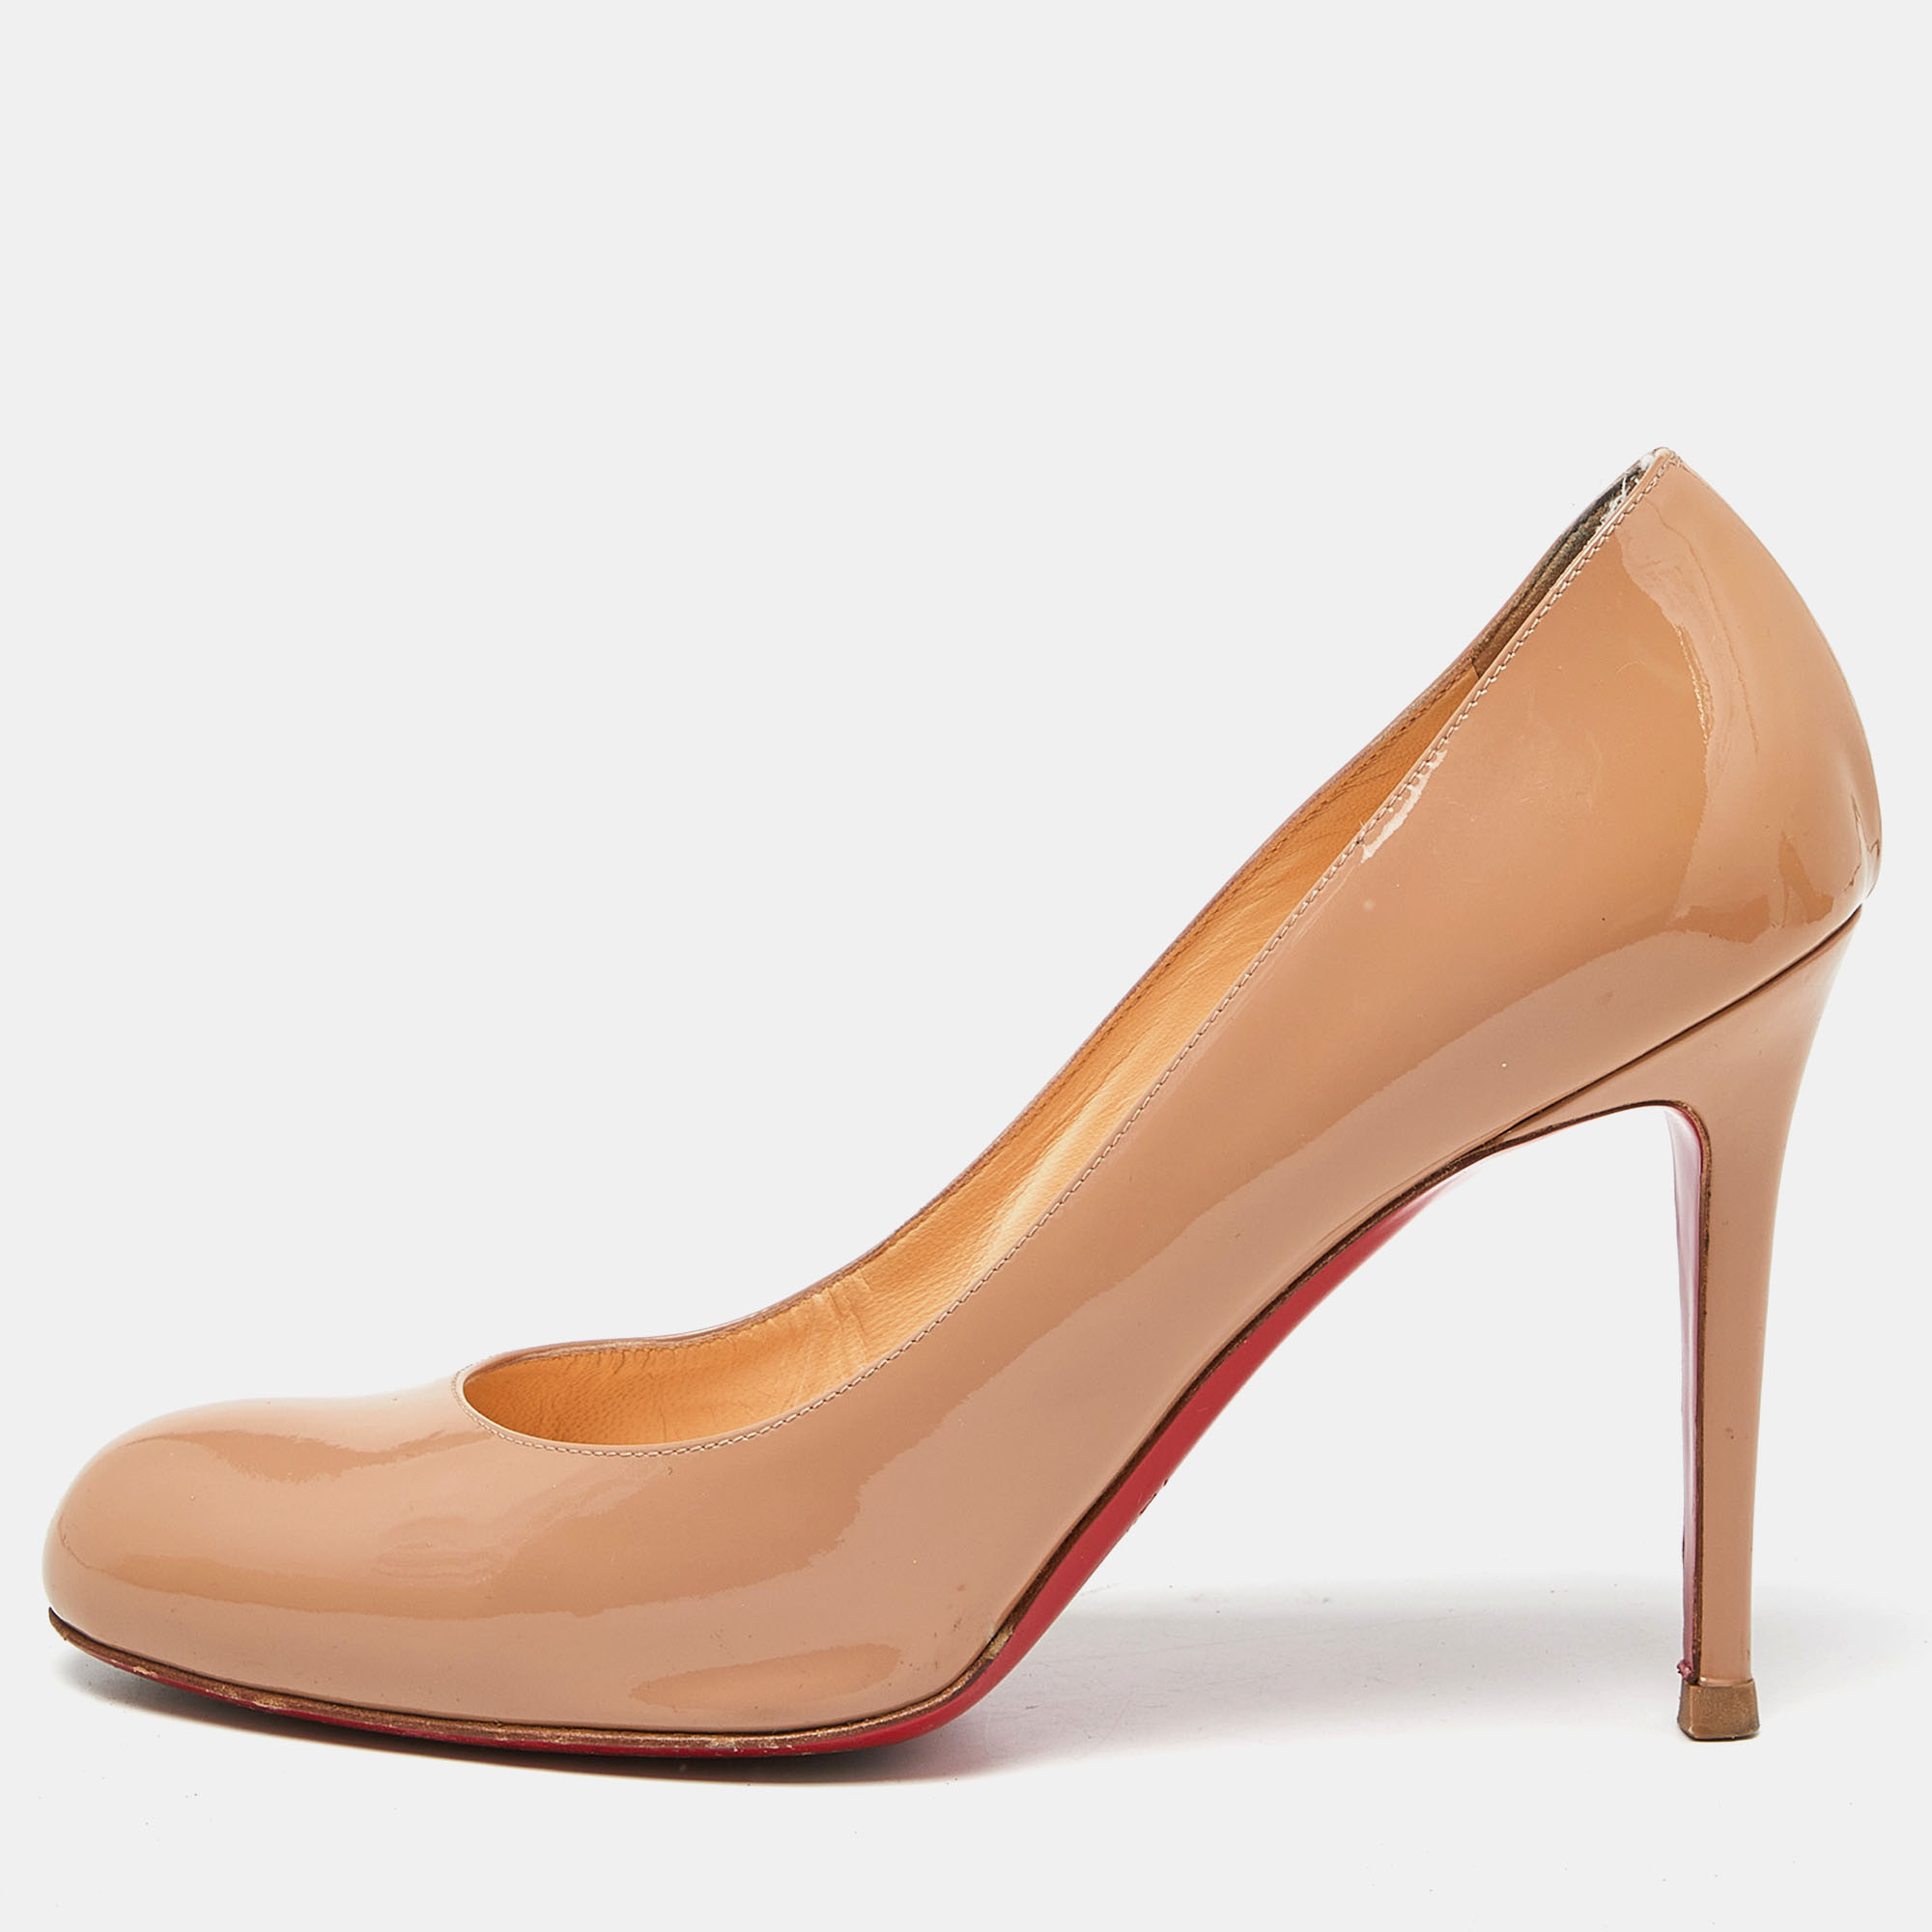 Pre-owned Christian Louboutin Beige Patent Leather New Simple Platform Pumps Size 39.5